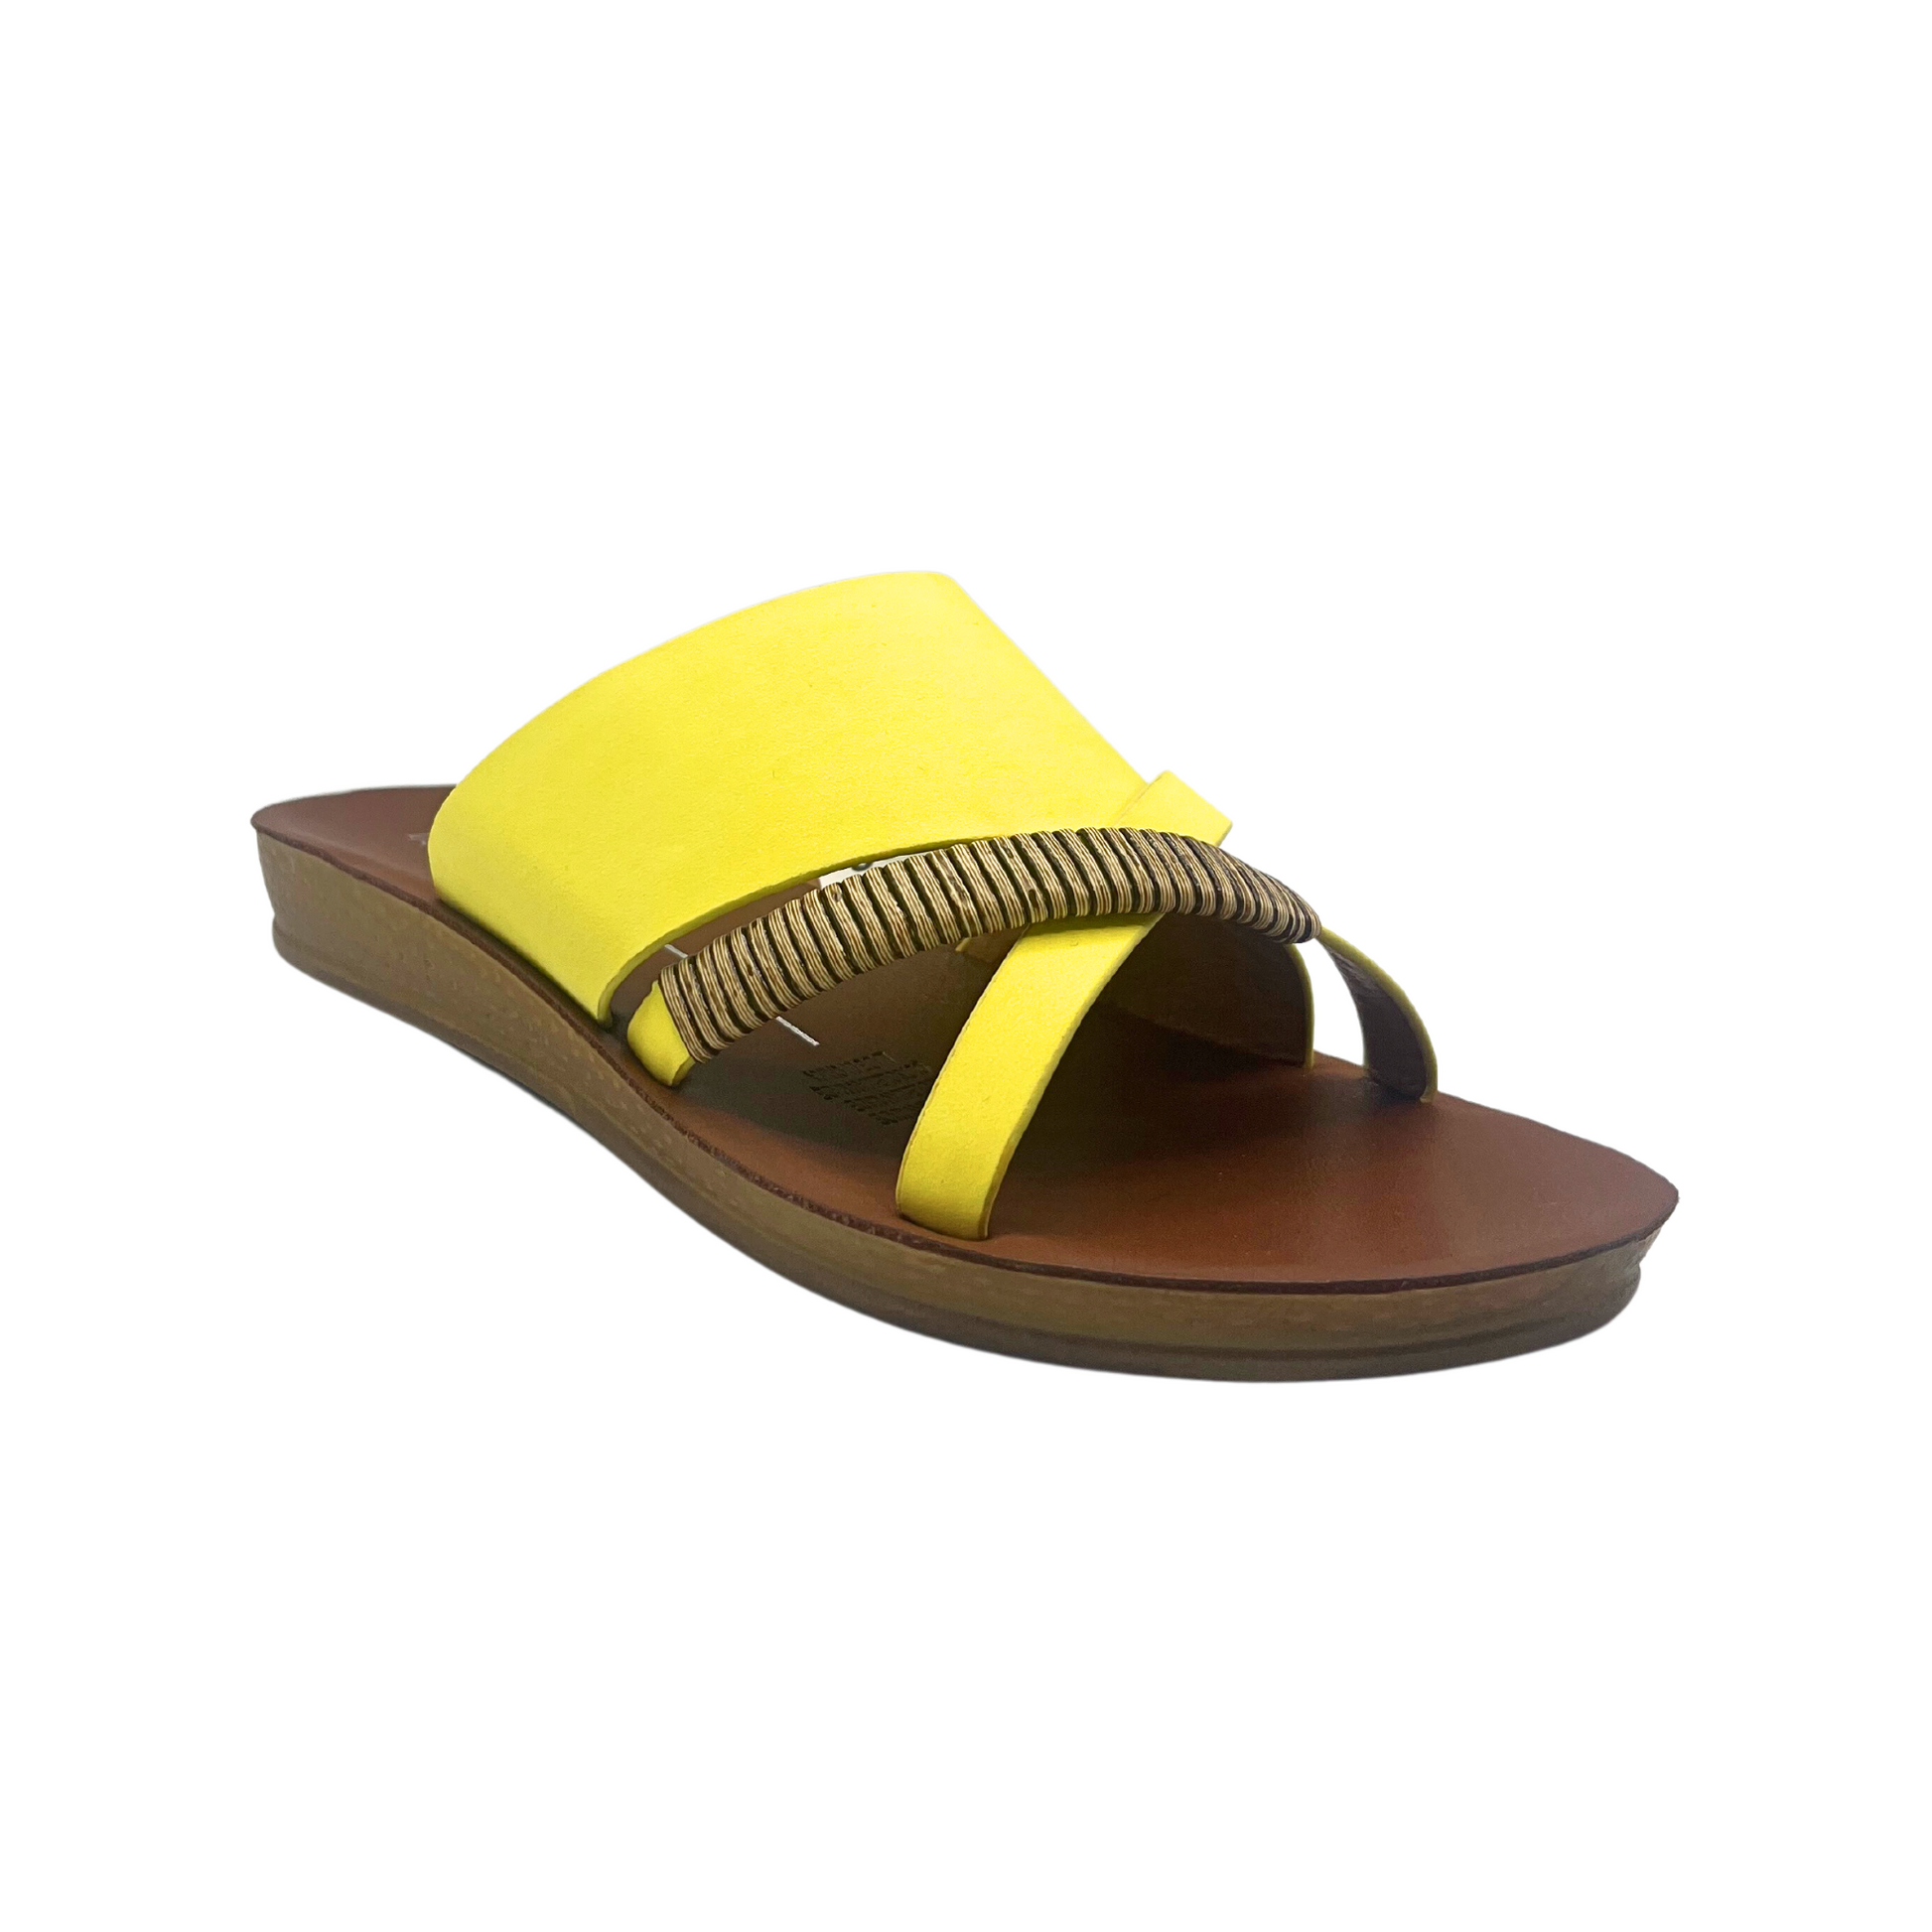 Angled front view of a fun summer sandal.  Essentialy flat, open toe and back.  Bright yellow leather upper 